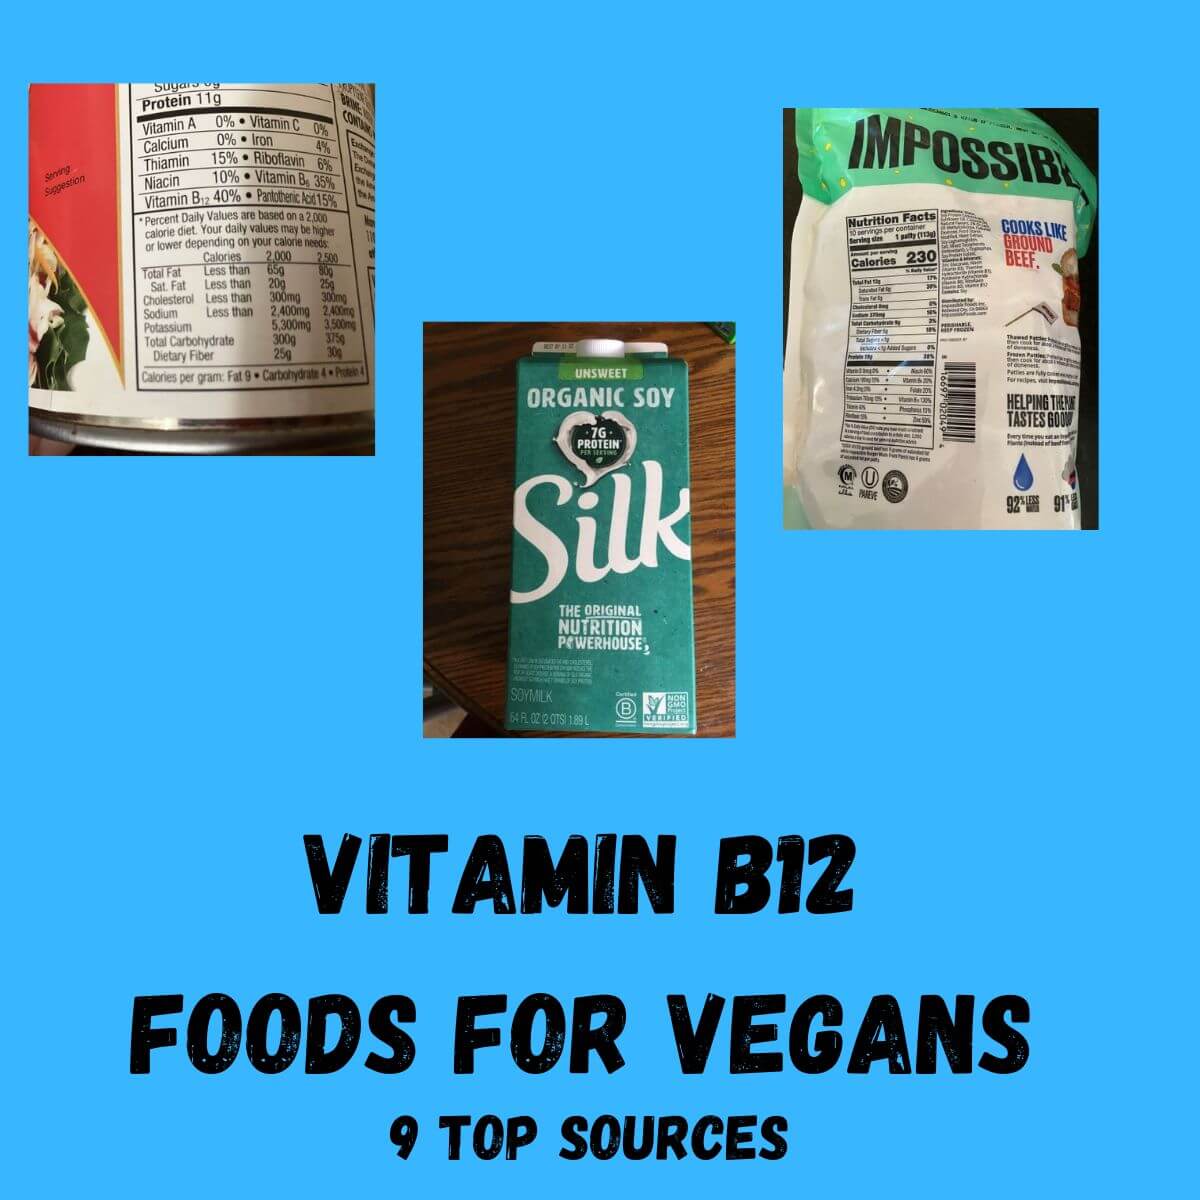 Text reads: Vitamin B12 Foods for Vegans 9 top sources. There is a picture of silk organic unsweetened soymilk, the back of Impossible Burgers package, and the vitamin and minerals back of package of older loma linda big franks.